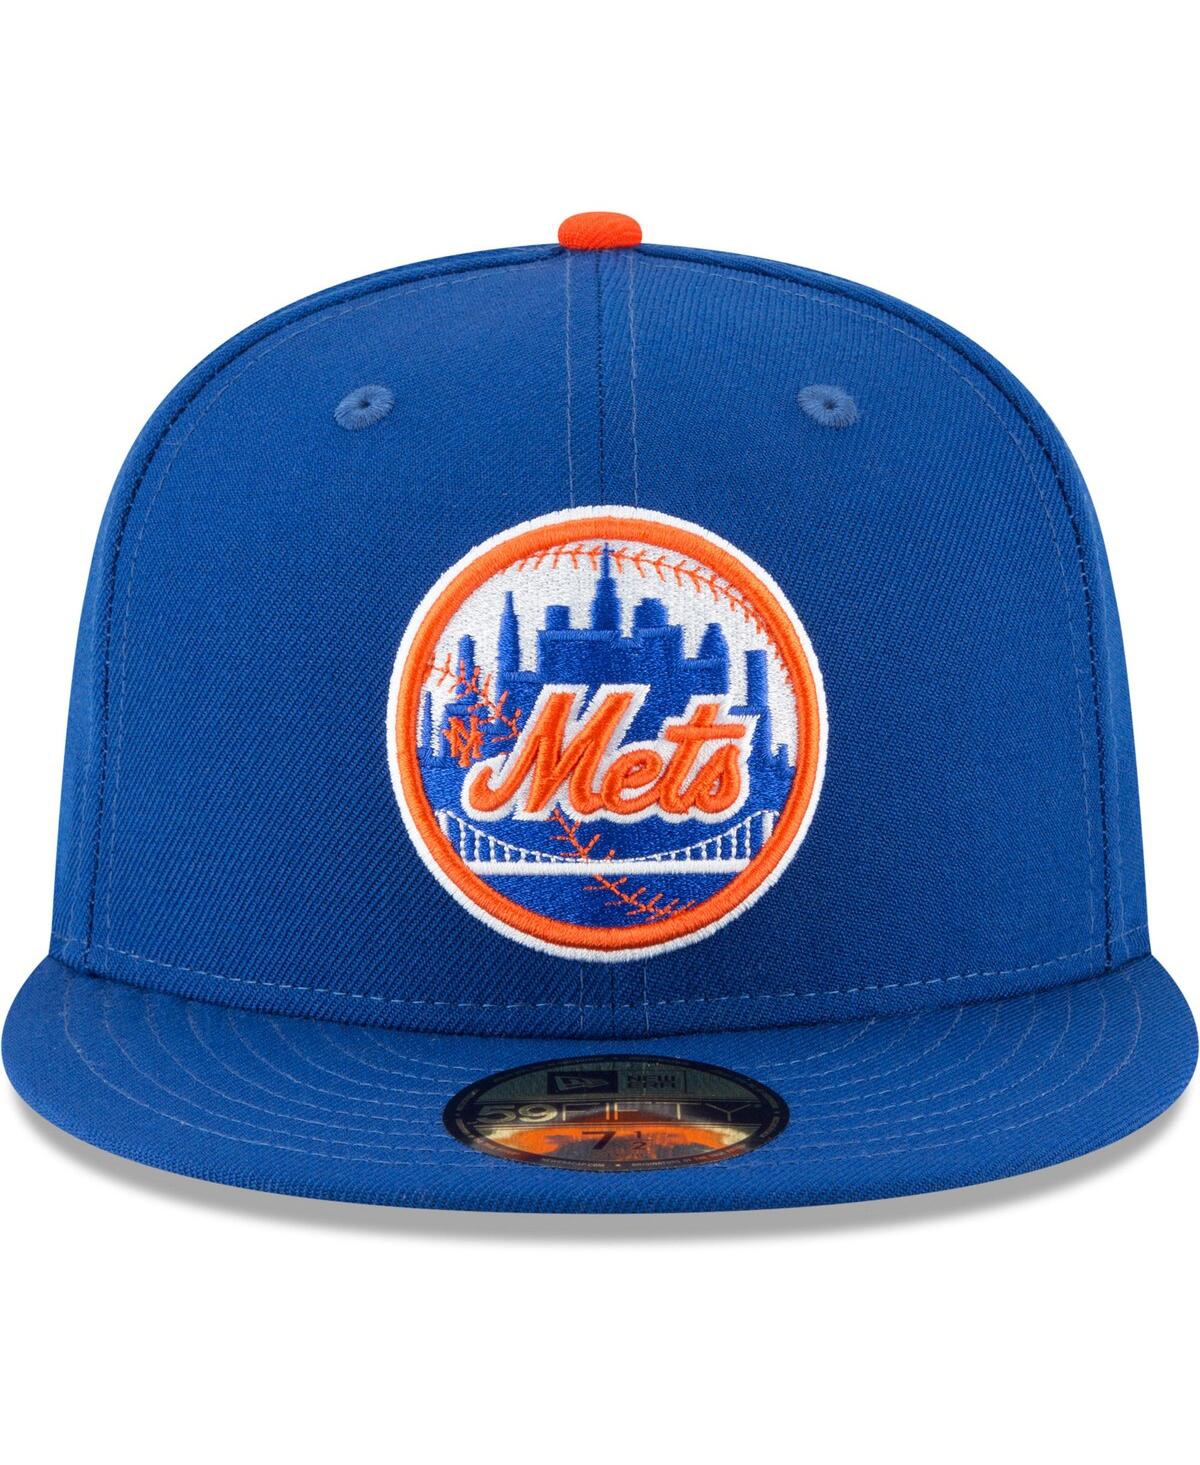 Shop New Era Men's  Blue New York Mets Cooperstown Collection Wool 59fifty Fitted Hat